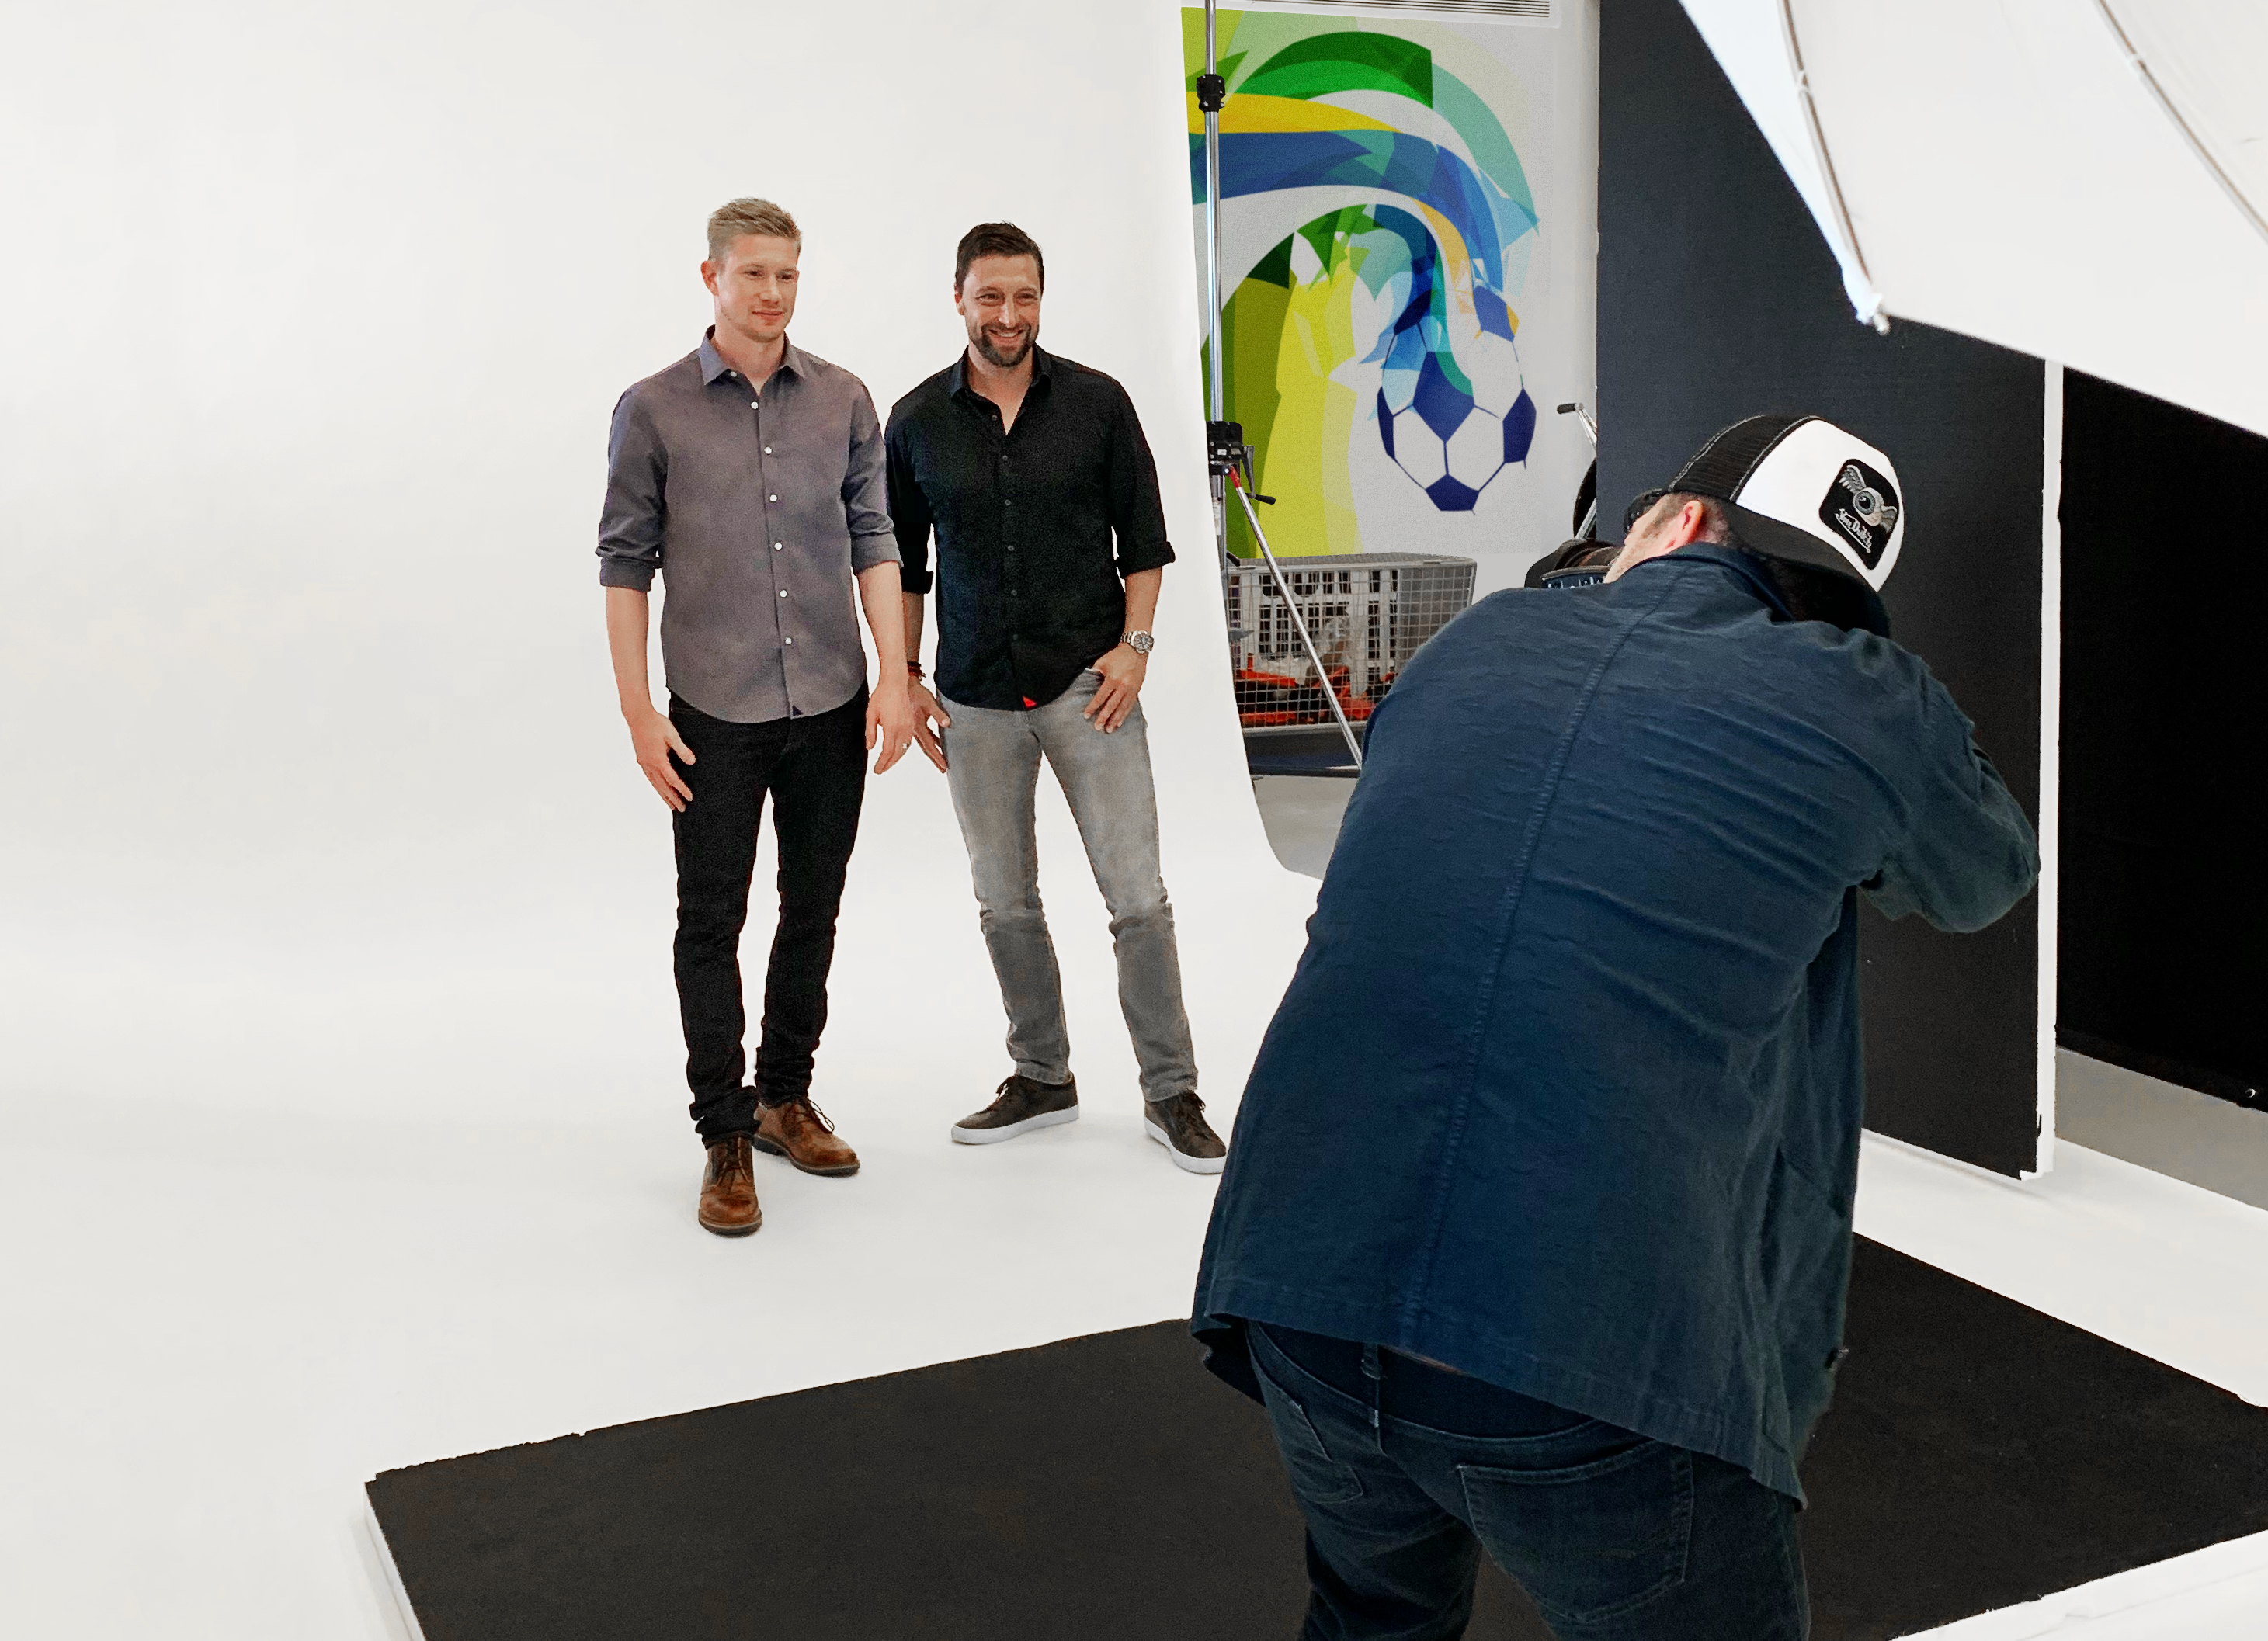 Kevin De Bruyne and UNTUCKit Founder Chris Riccobono behind the scenes image